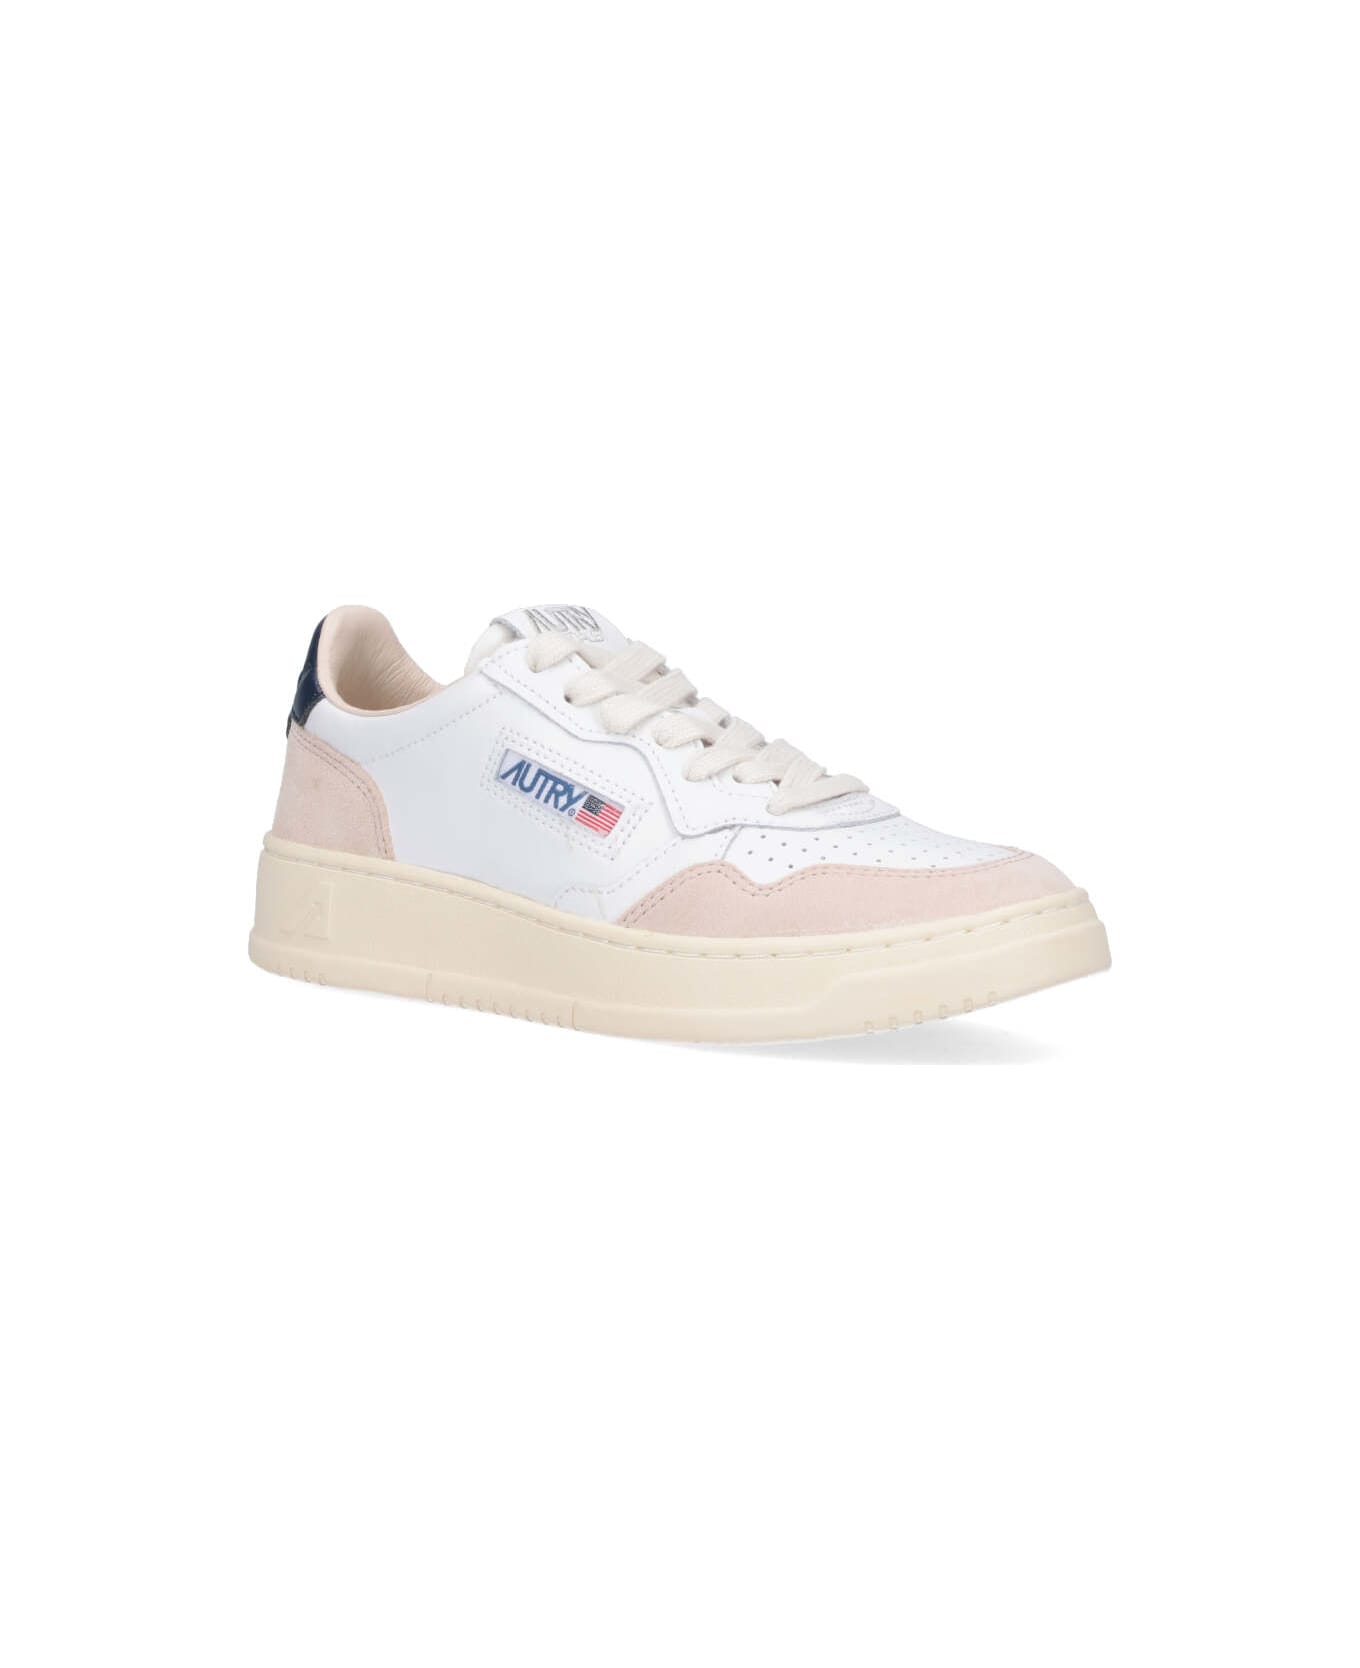 Autry 'medalist' Low Sneakers - Wht/blue スニーカー